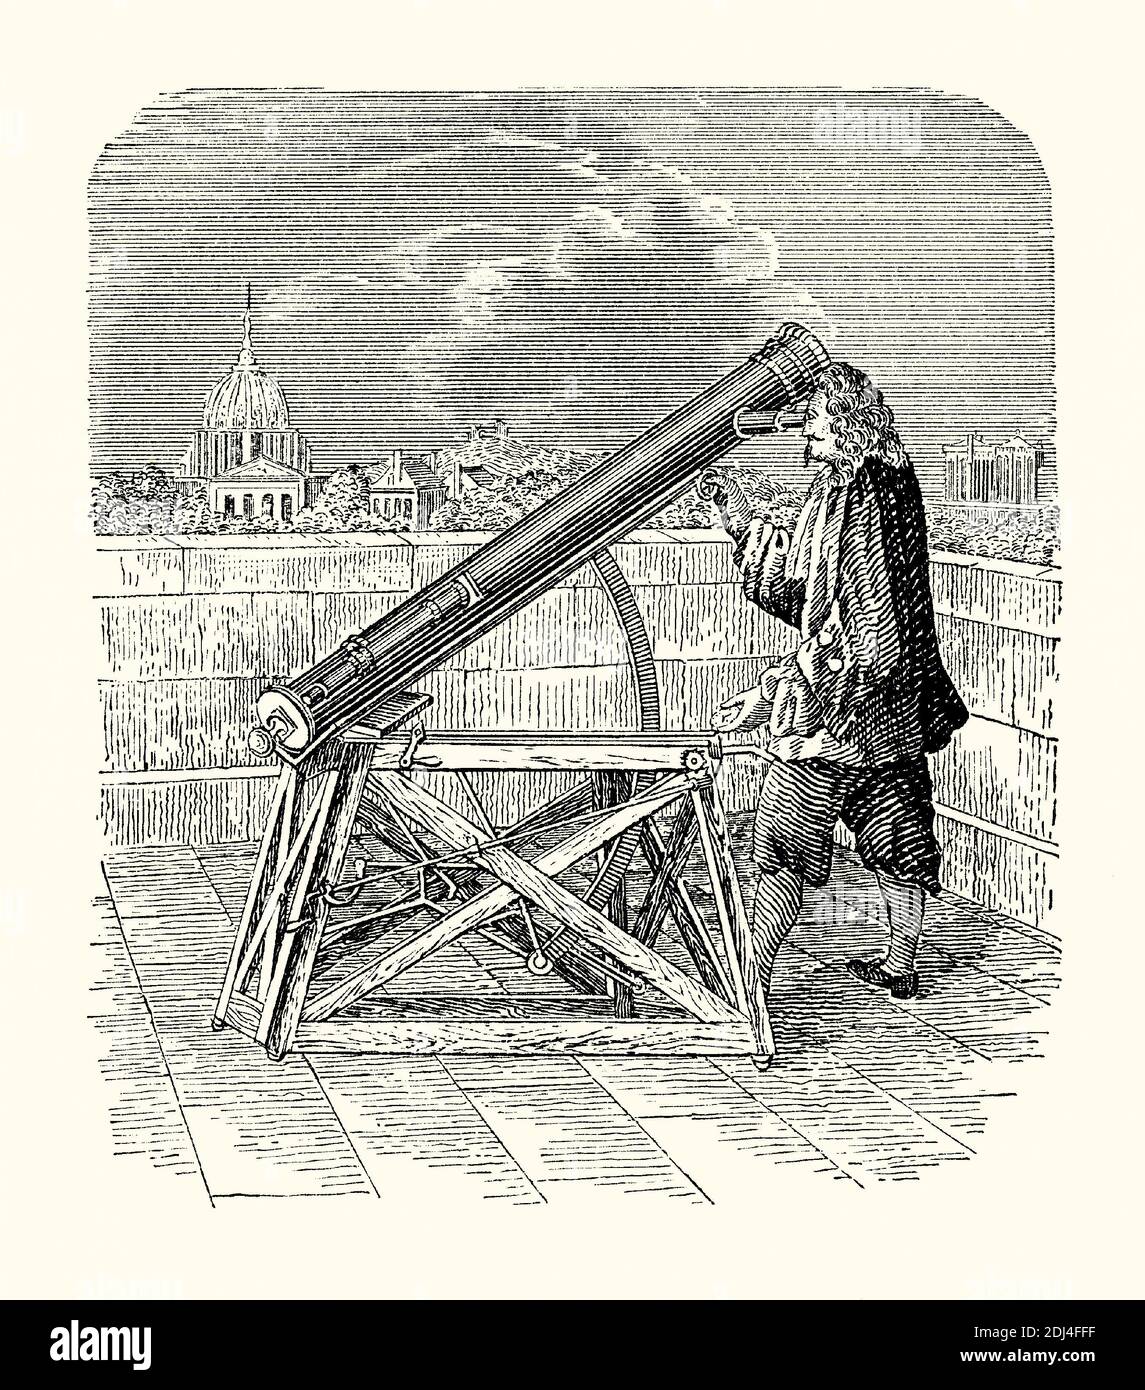 An Old Engraving Showing Isaac Newton And His Reflecting Telescope London England Uk C 1670 6892